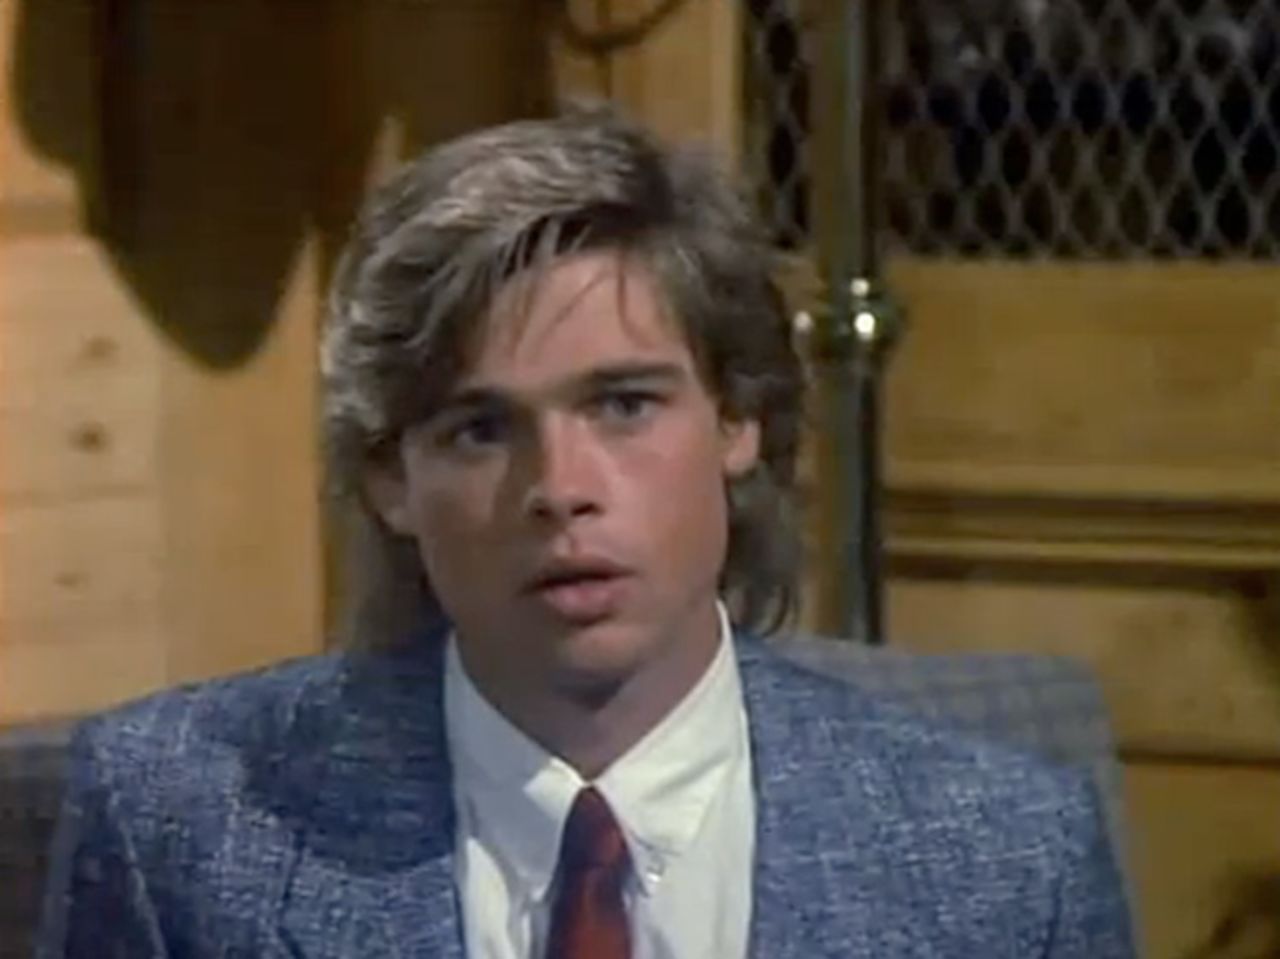 TV fans might remember a youthful Brad Pitt launching his career with appearances on "Another World," "21 Jump Street" and "Dallas" in his early 20s. Here, he's seen as a recurring character named Randy on "Dallas," a role he held from 1987 to 1988.